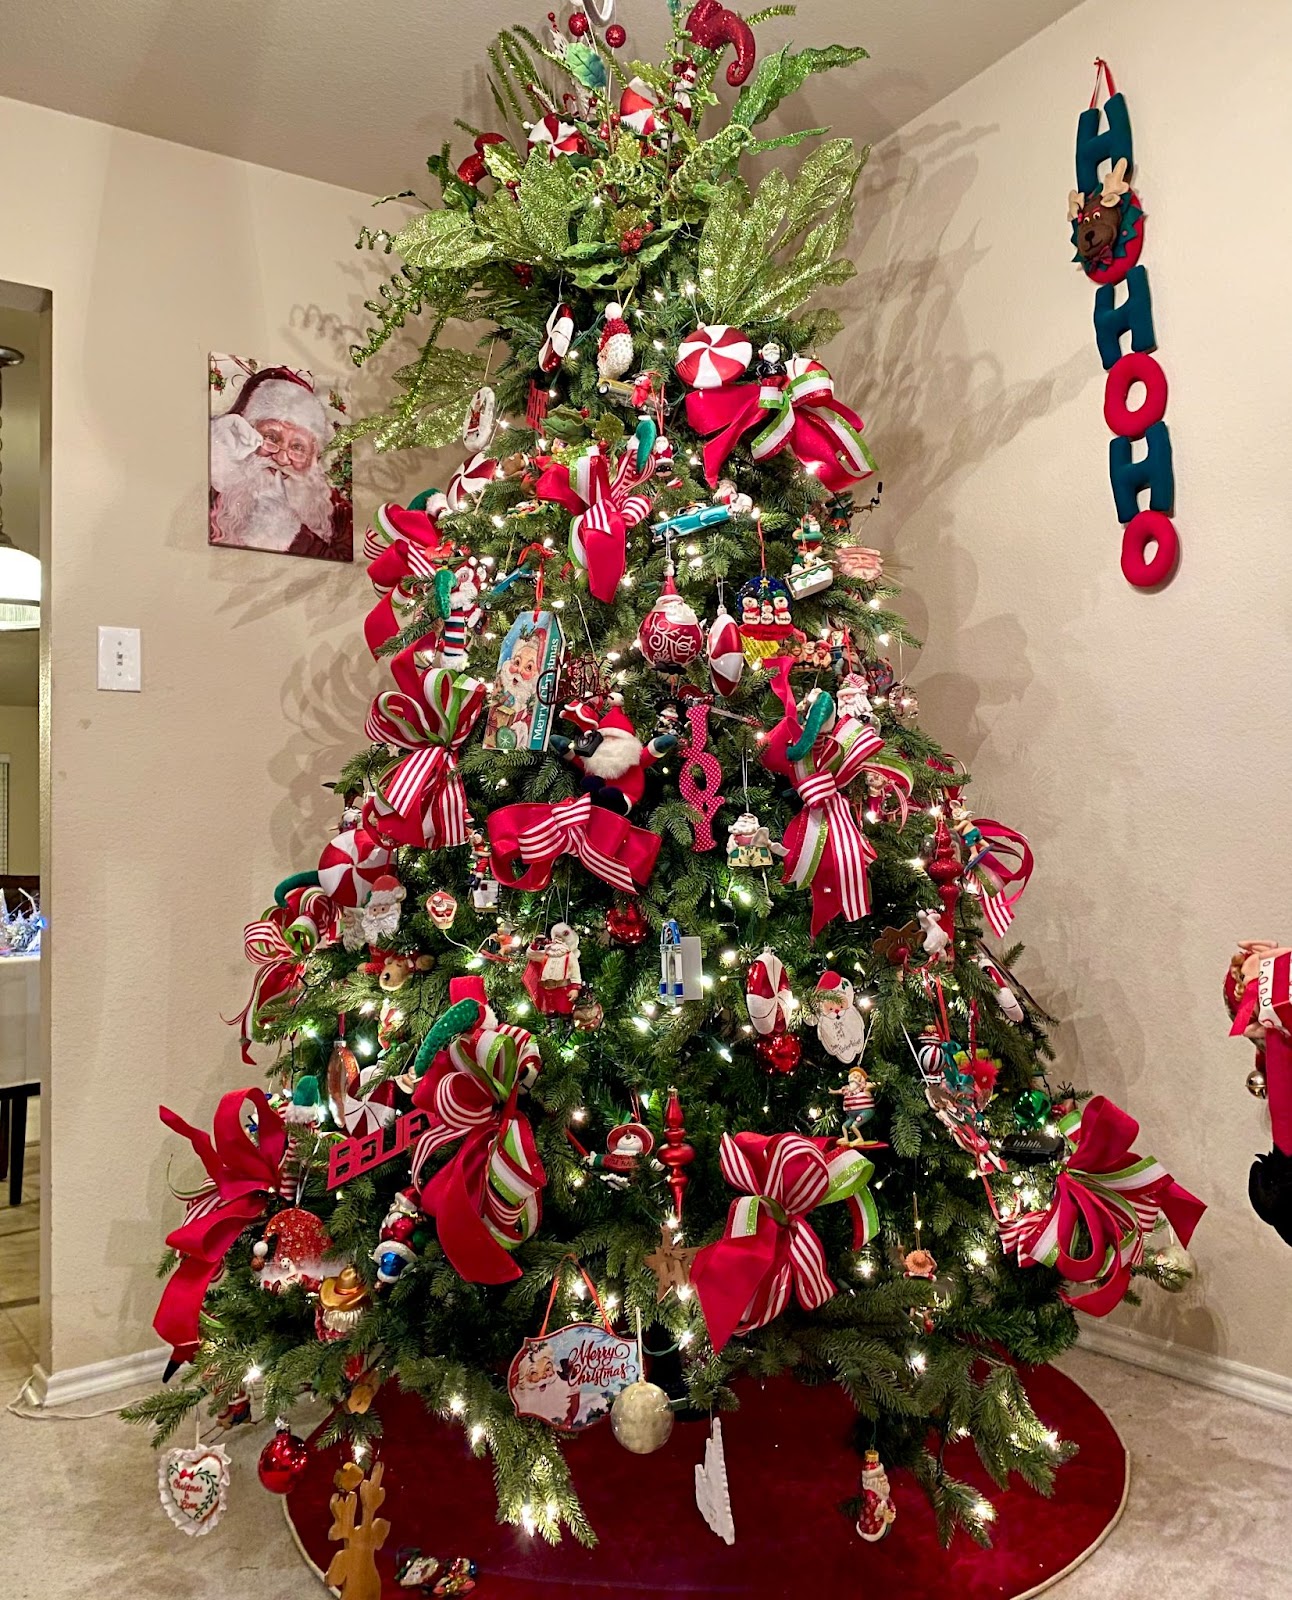 Red, white and green Christmas tree